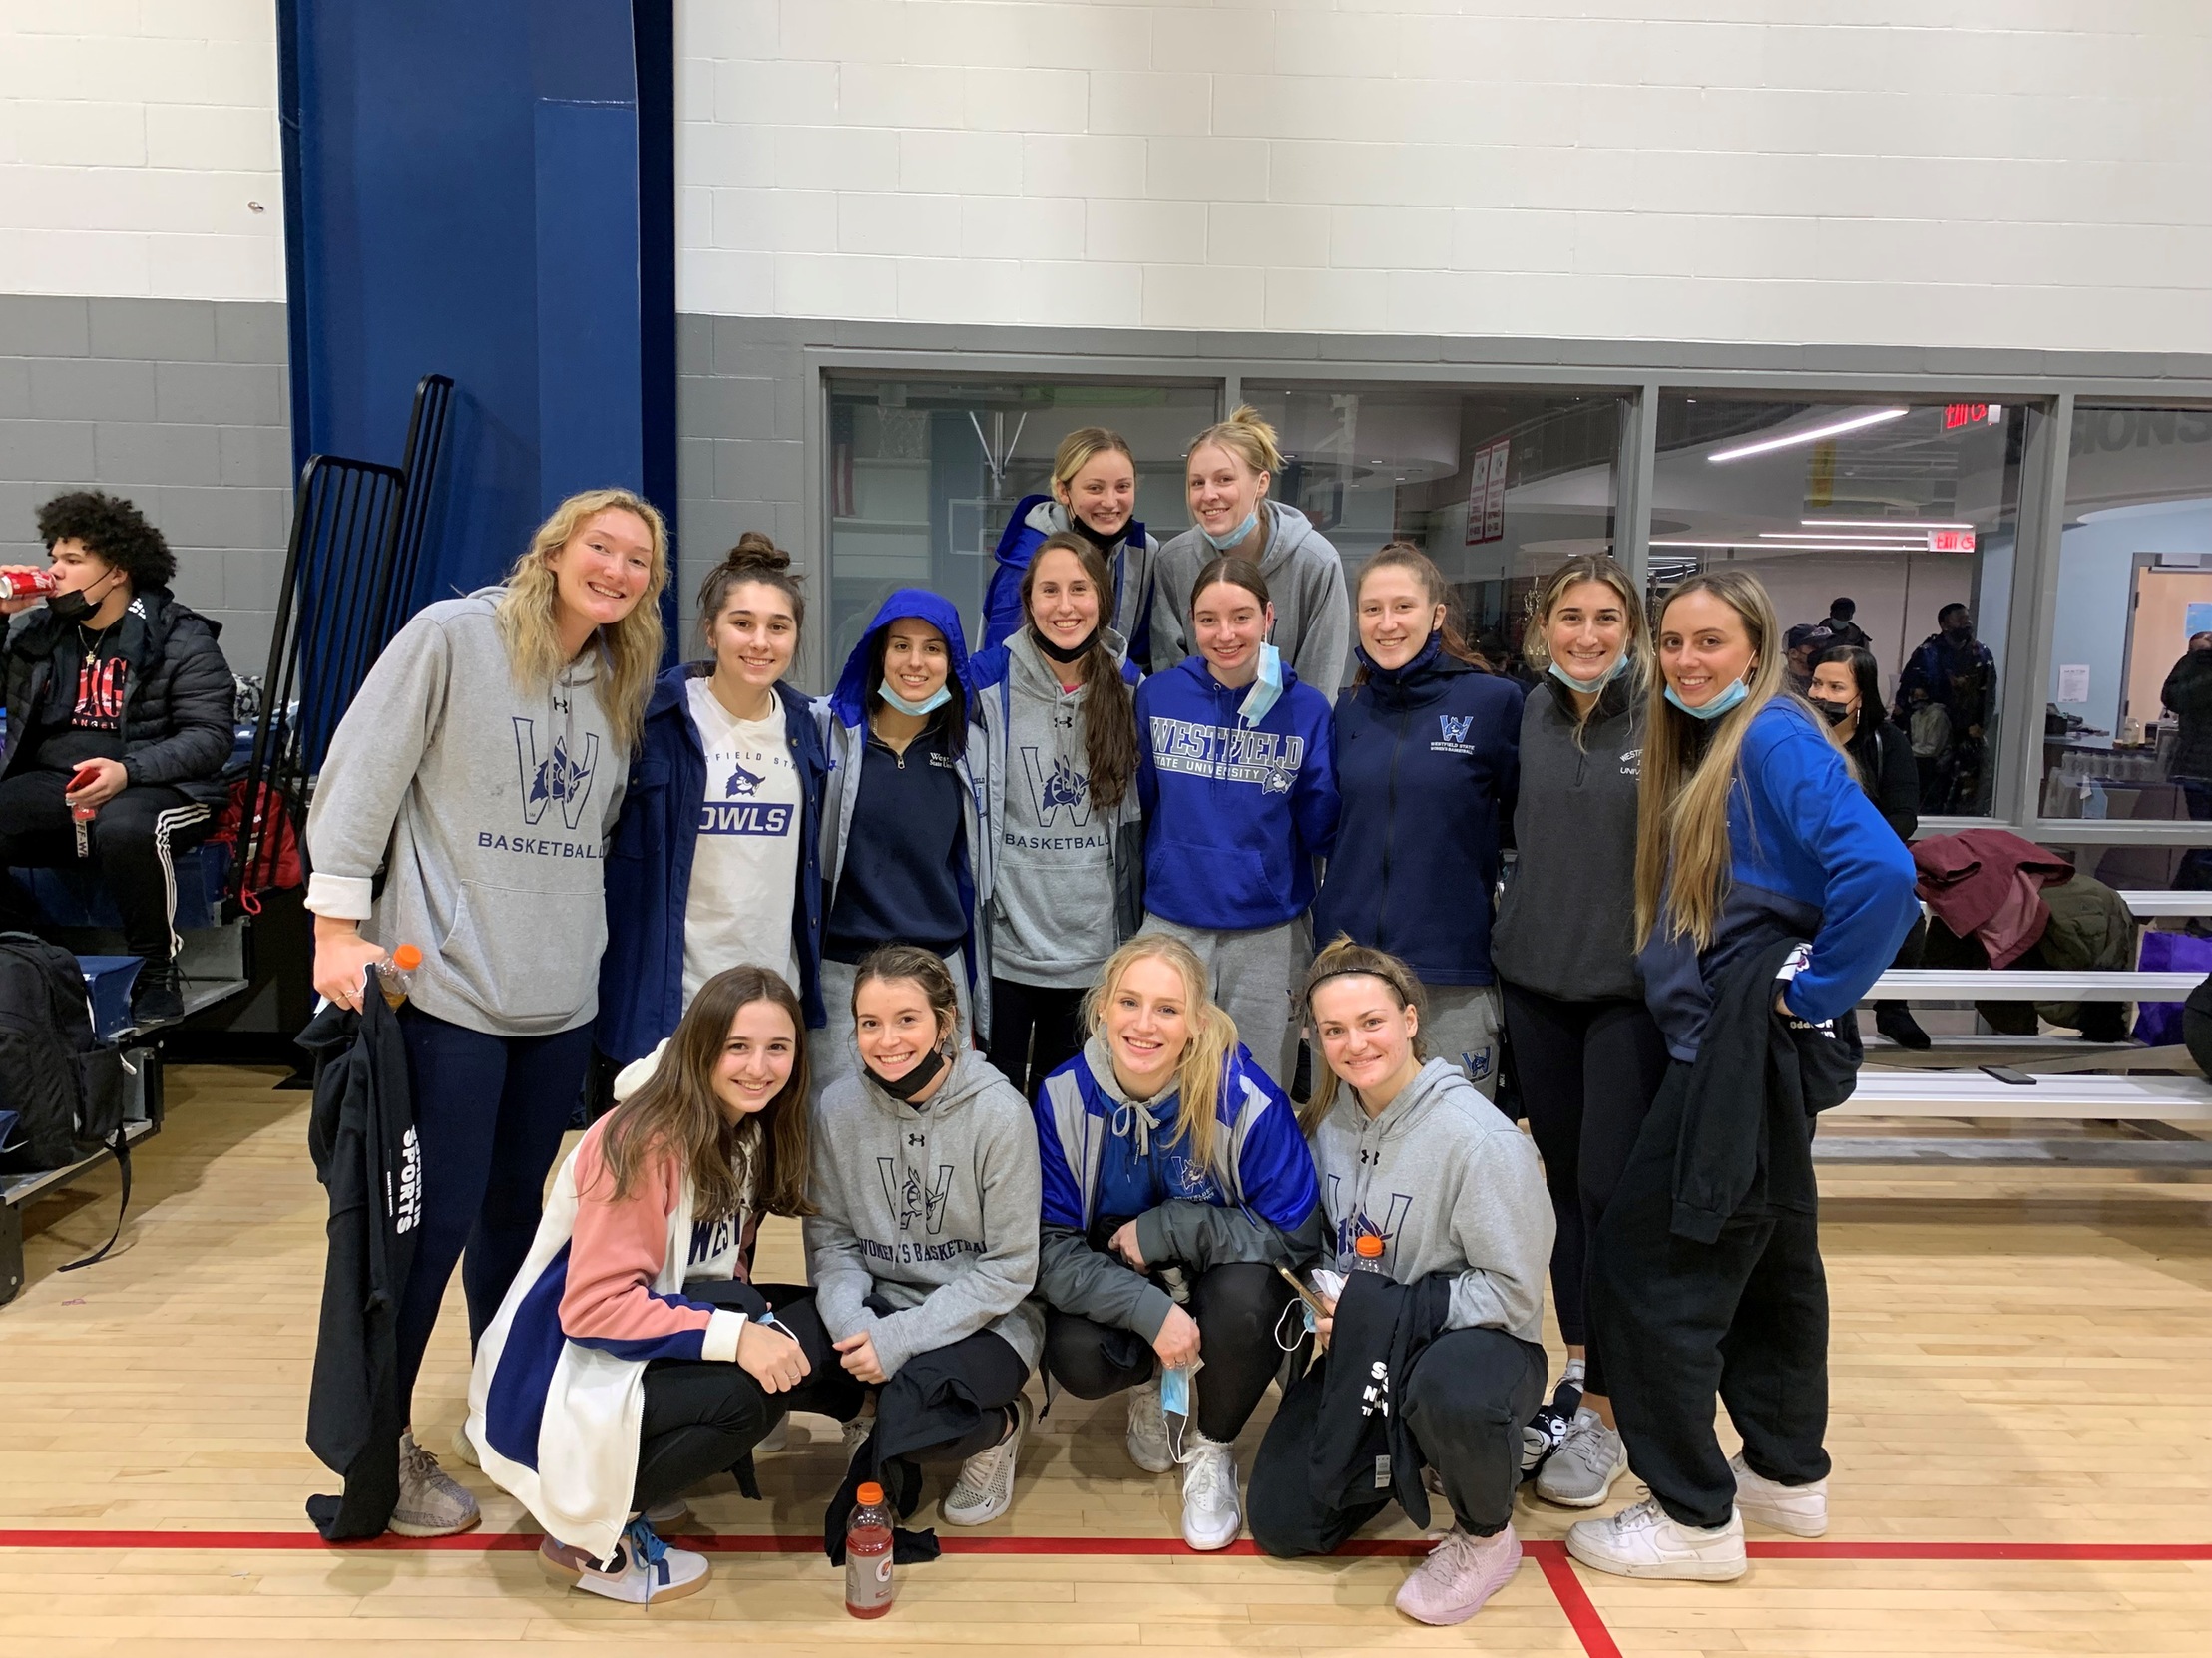 Westfield State's women's basketball team poses after volunteering at the South End Community Center in Springfield as part of National Girls And Women in Sport dat activities in Feb. 2022